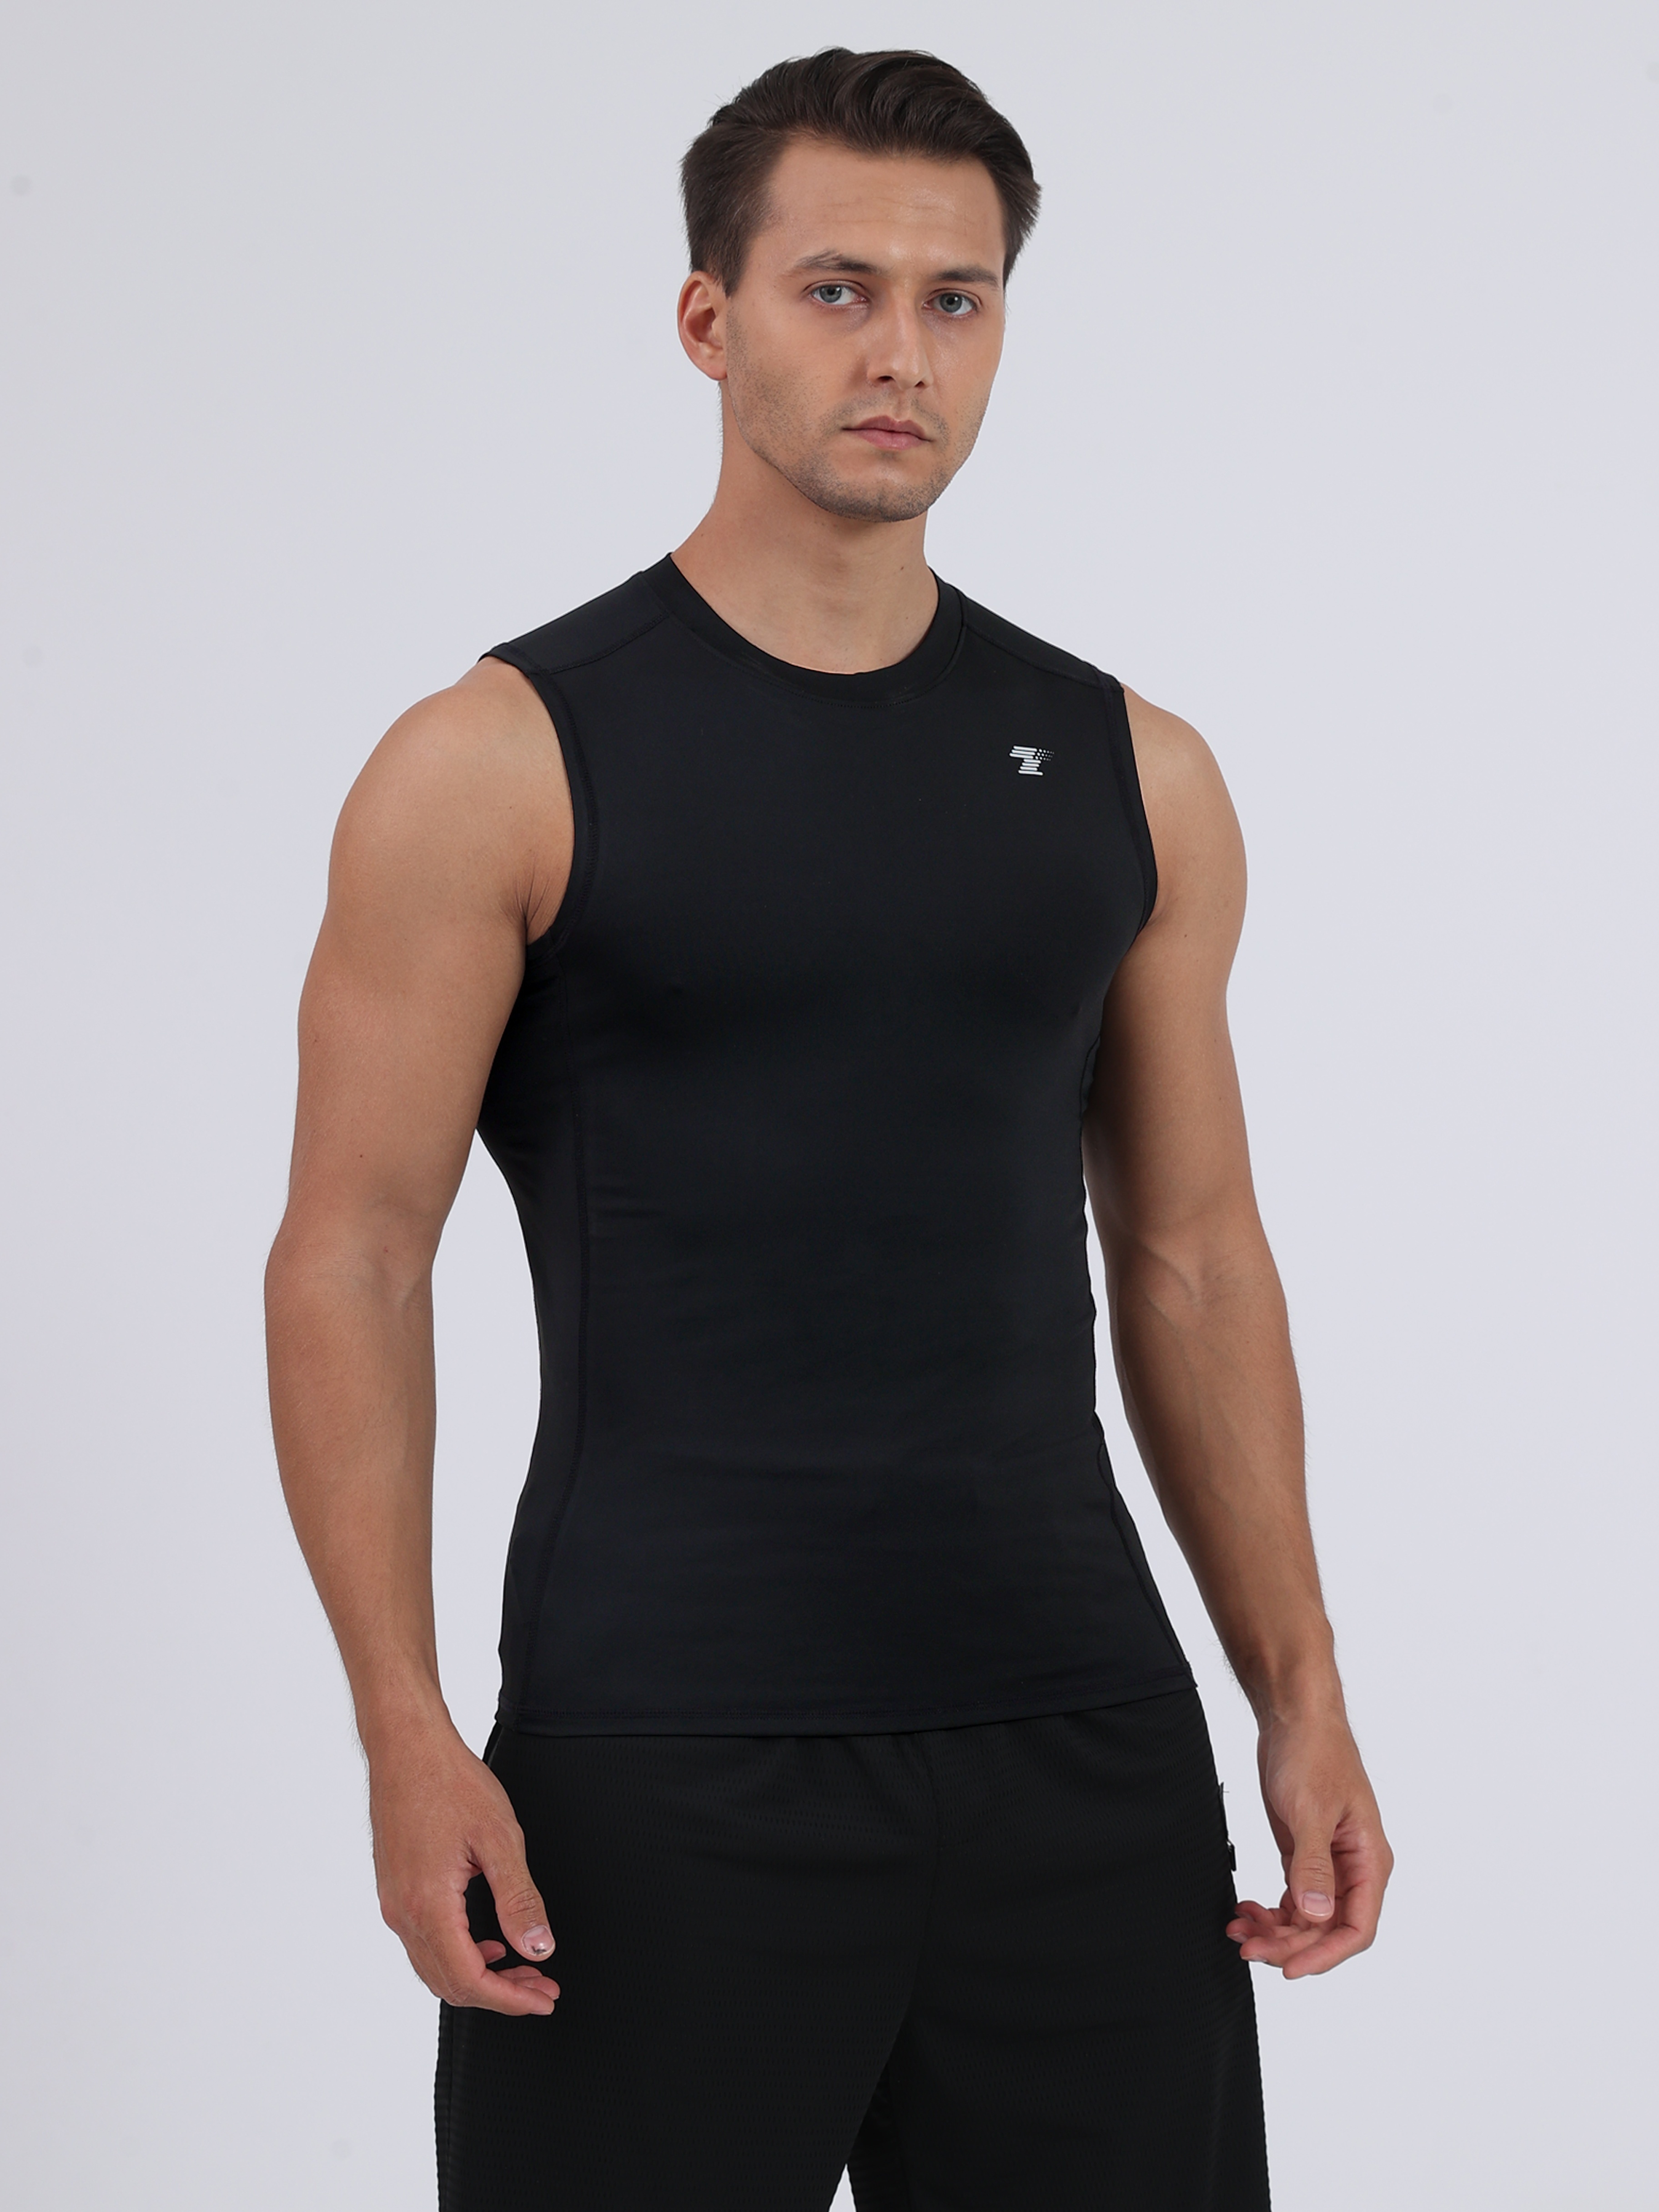 Athletic Men's Bamboo Cotton Blended Performance Tank Top Compression Under  Base Layer Sport Tank Top - China Men's T-Shirt with Logo and Men's T-Shirt  price